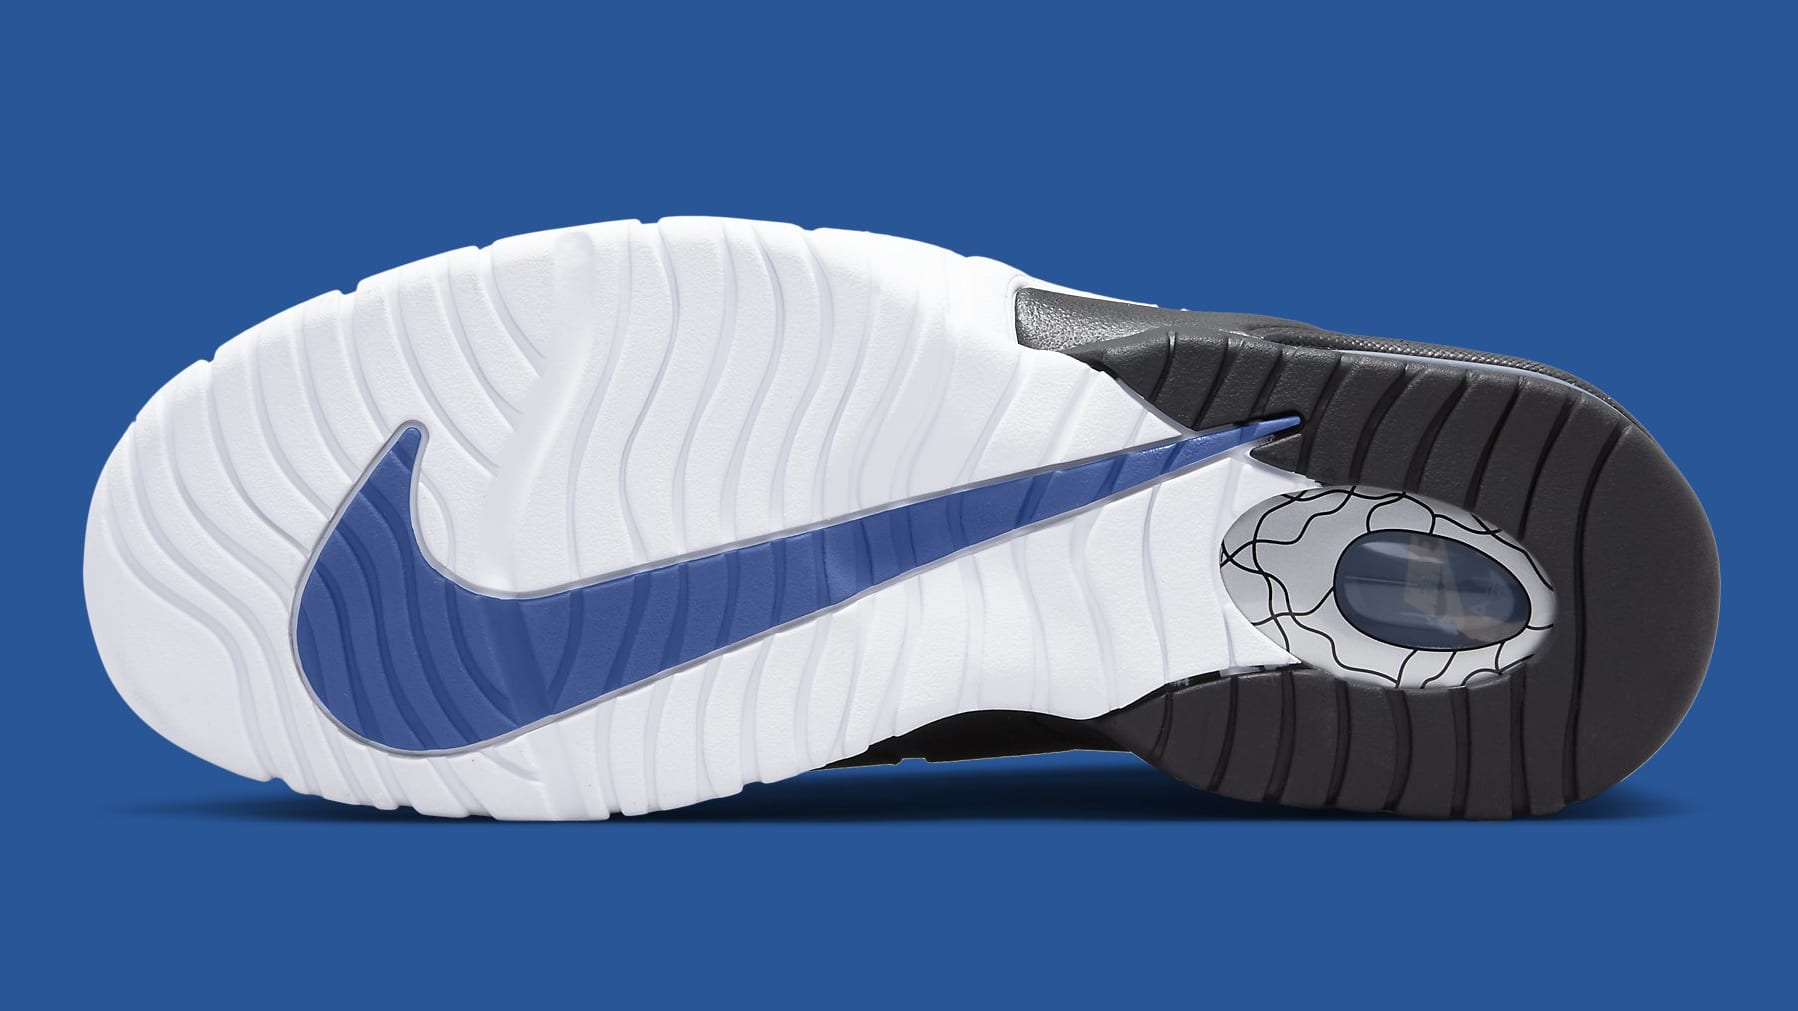 Nike Air Max Penny 1 Orlando Release Date Dn2487-001 Sole